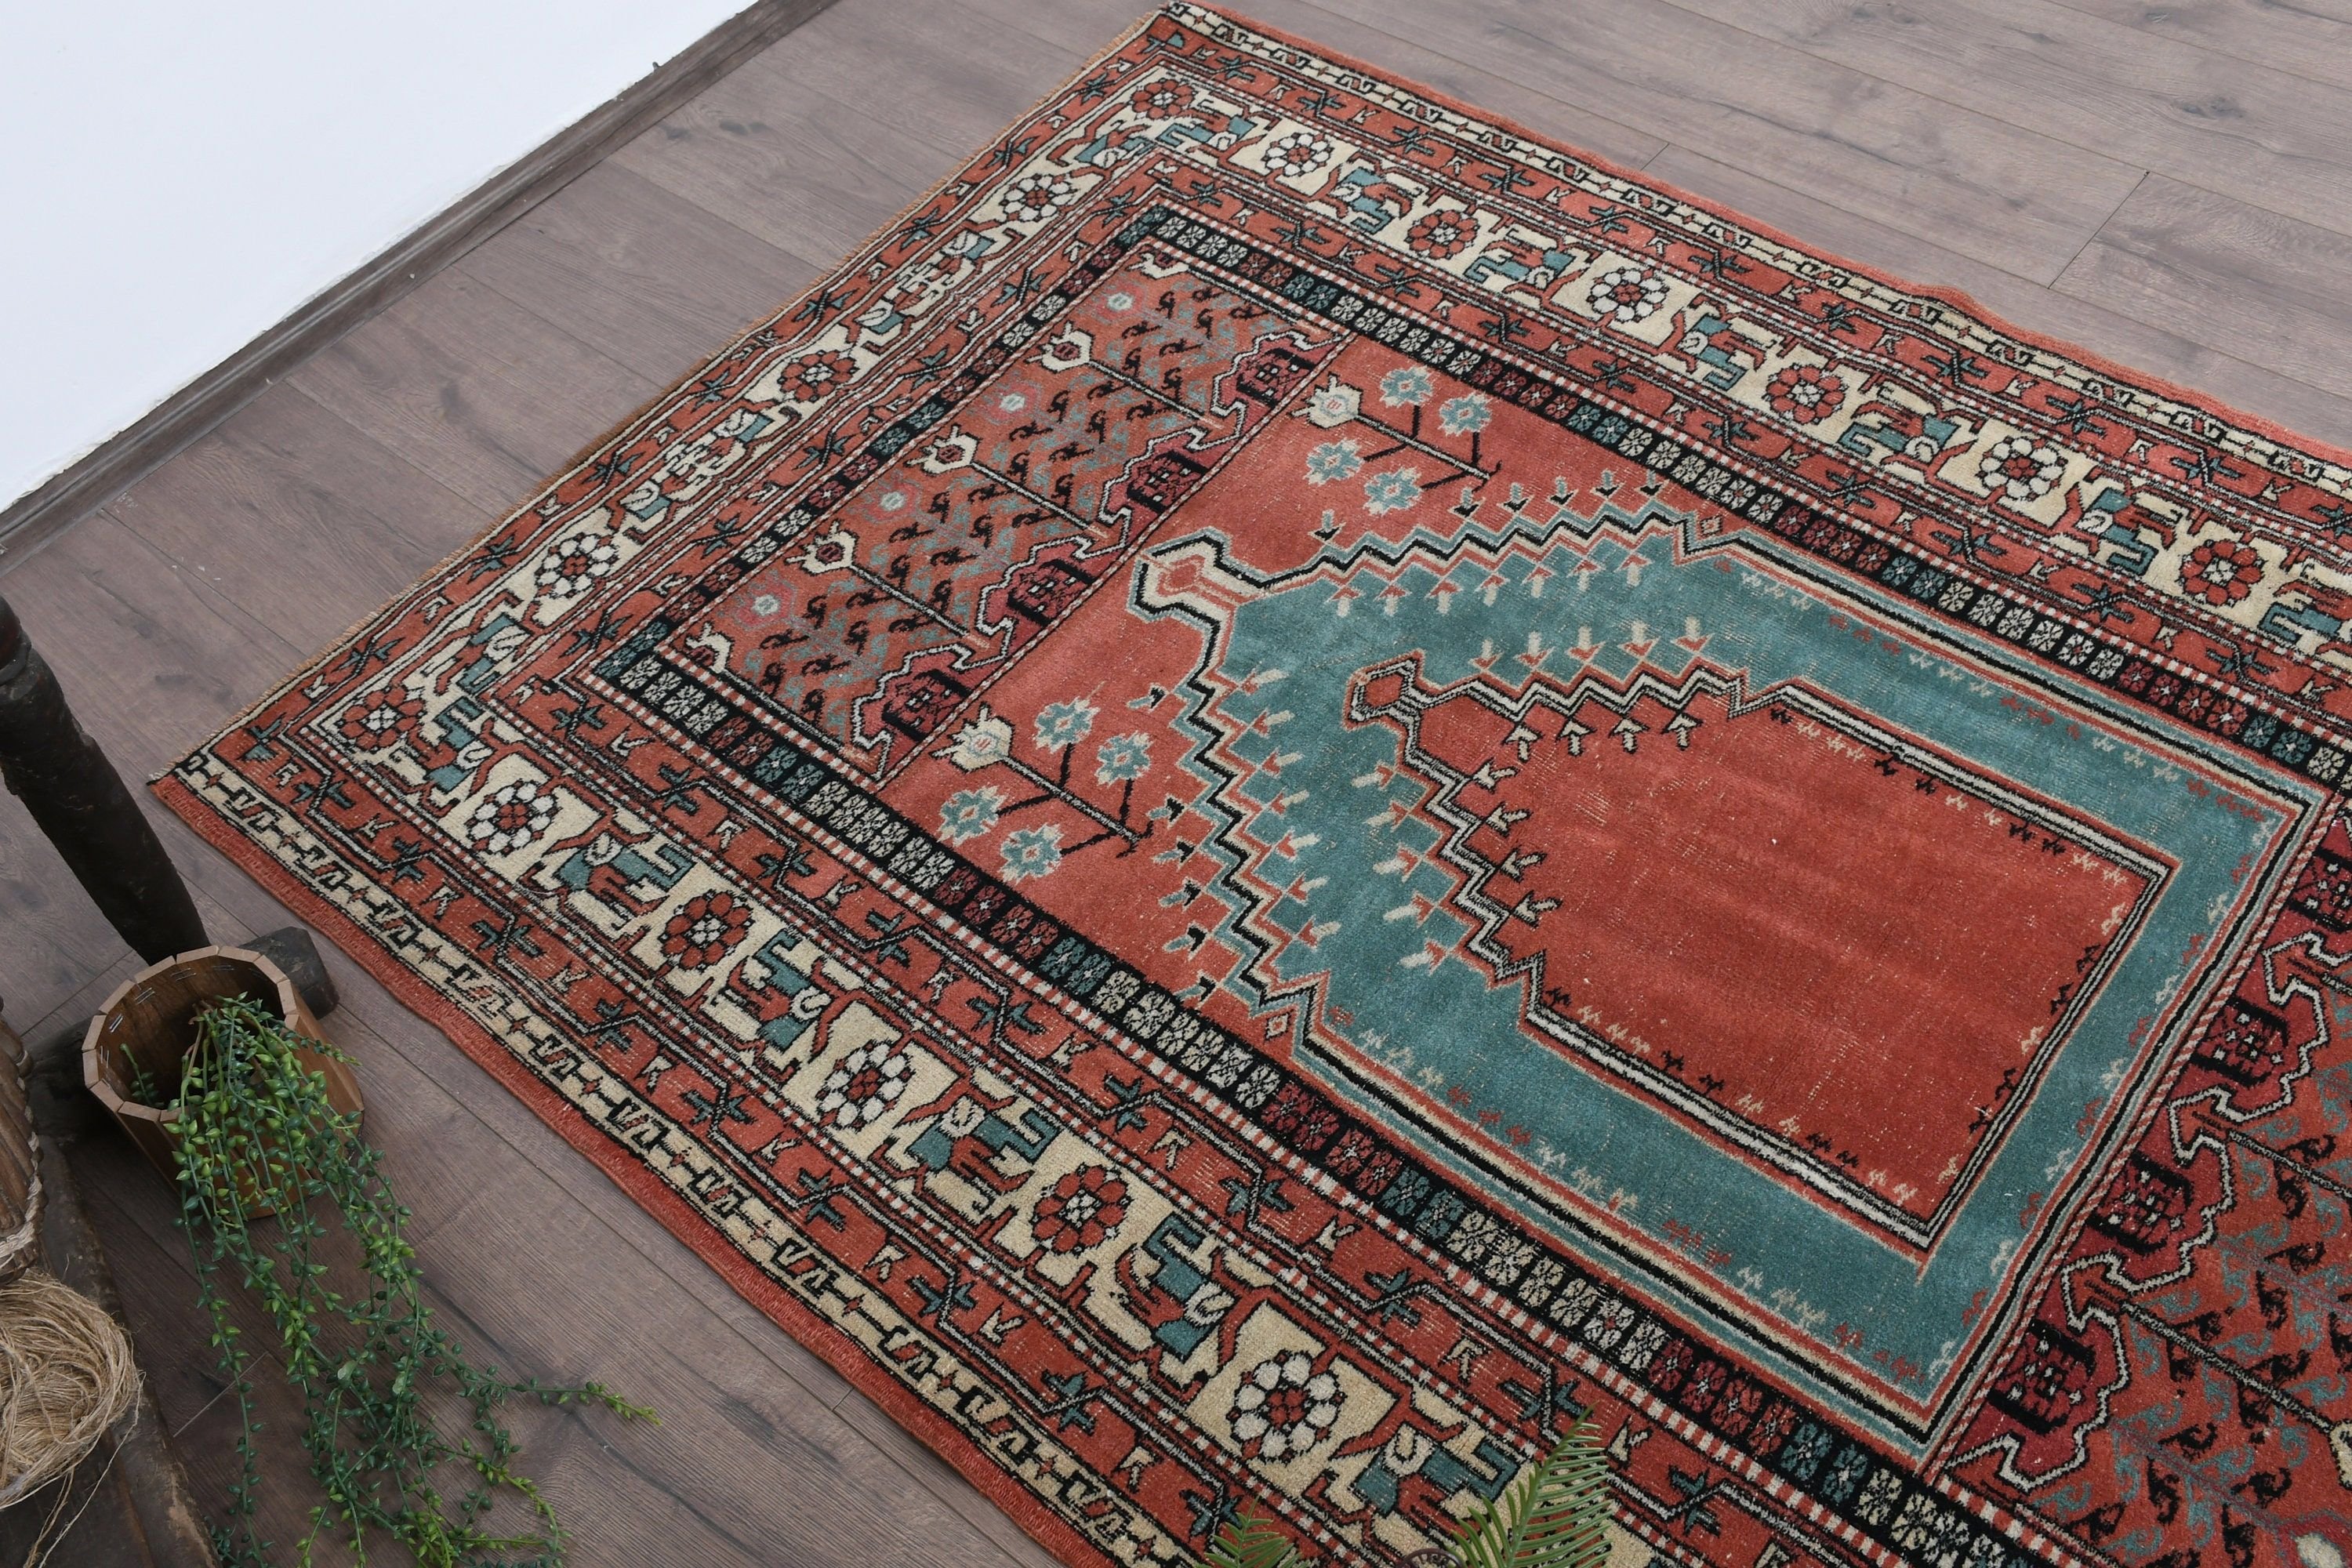 Red Cool Rugs, 4.1x5.5 ft Accent Rug, Kitchen Rugs, Entry Rugs, Turkish Rug, Rugs for Entry, Vintage Rug, Bedroom Rugs, Anatolian Rug